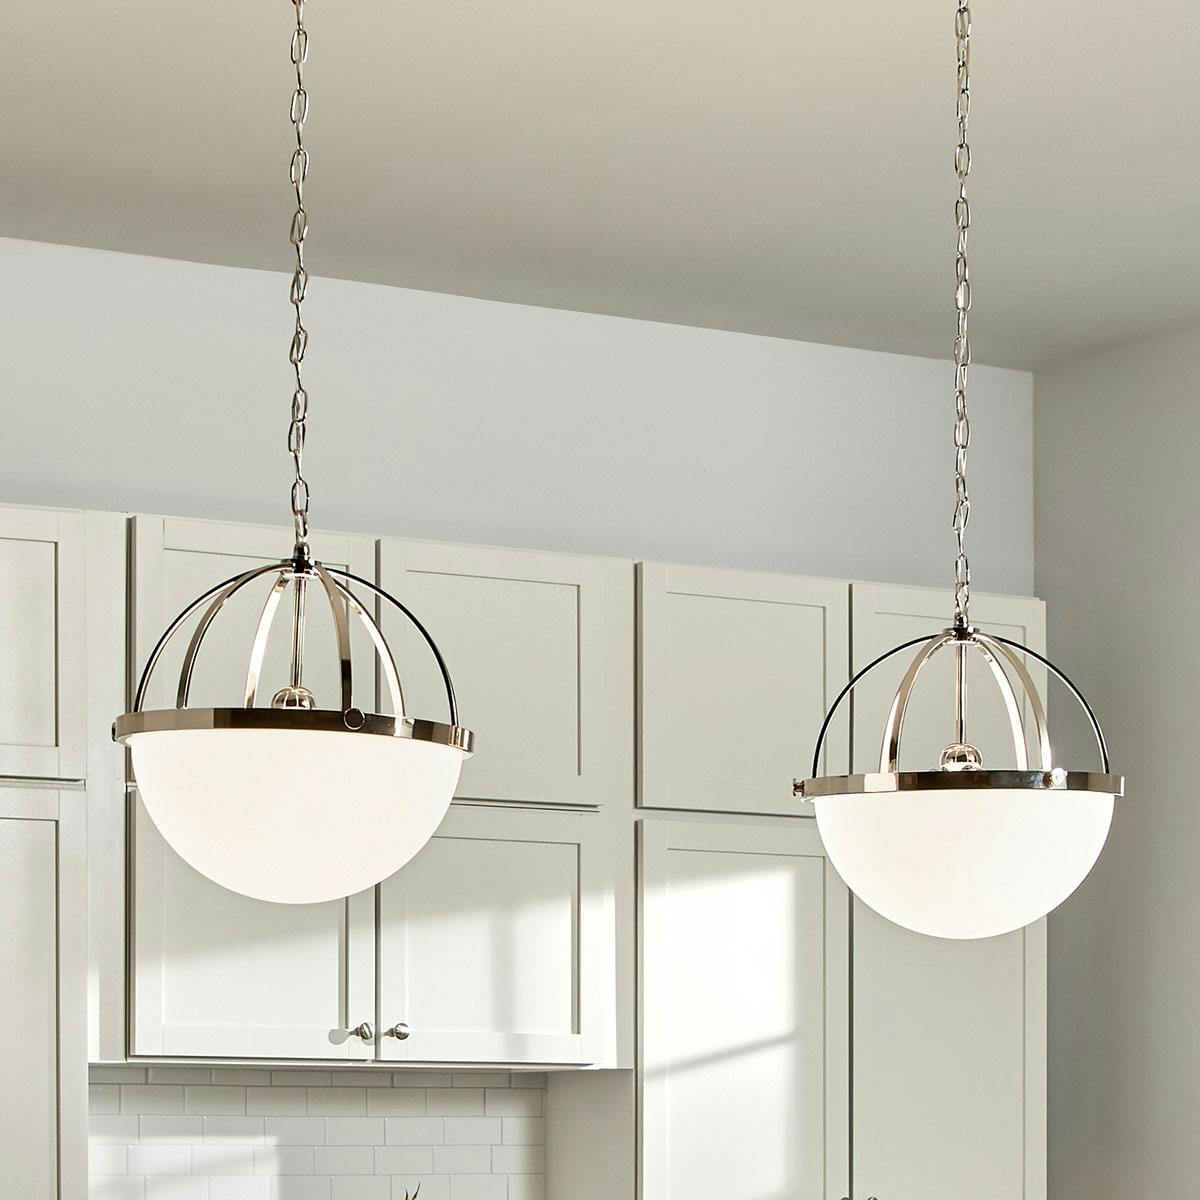 Day time Kichen image featuring Edmar pendant 52135PN